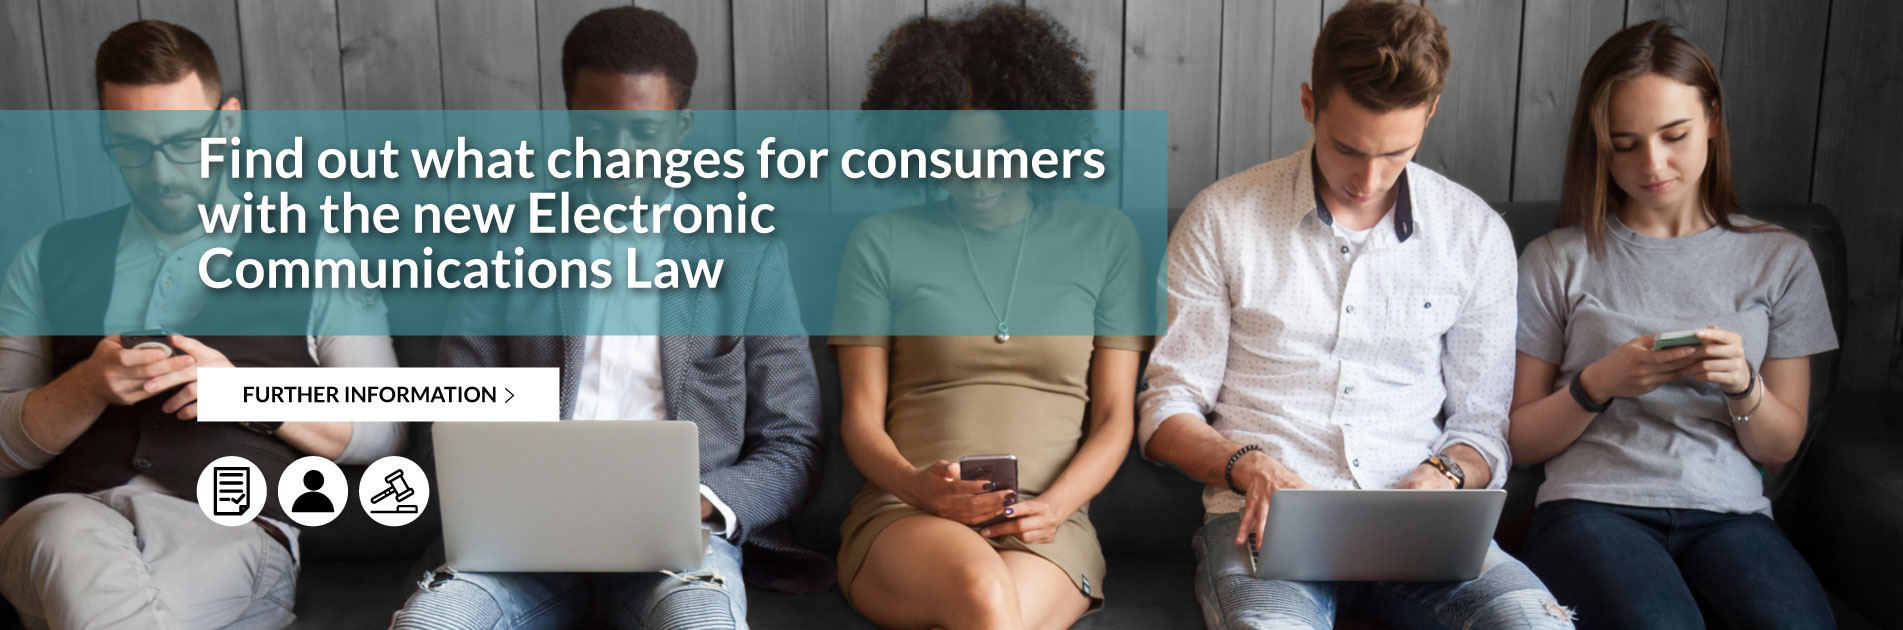 Find out what changes for consumers with the new Electronic Communications Law